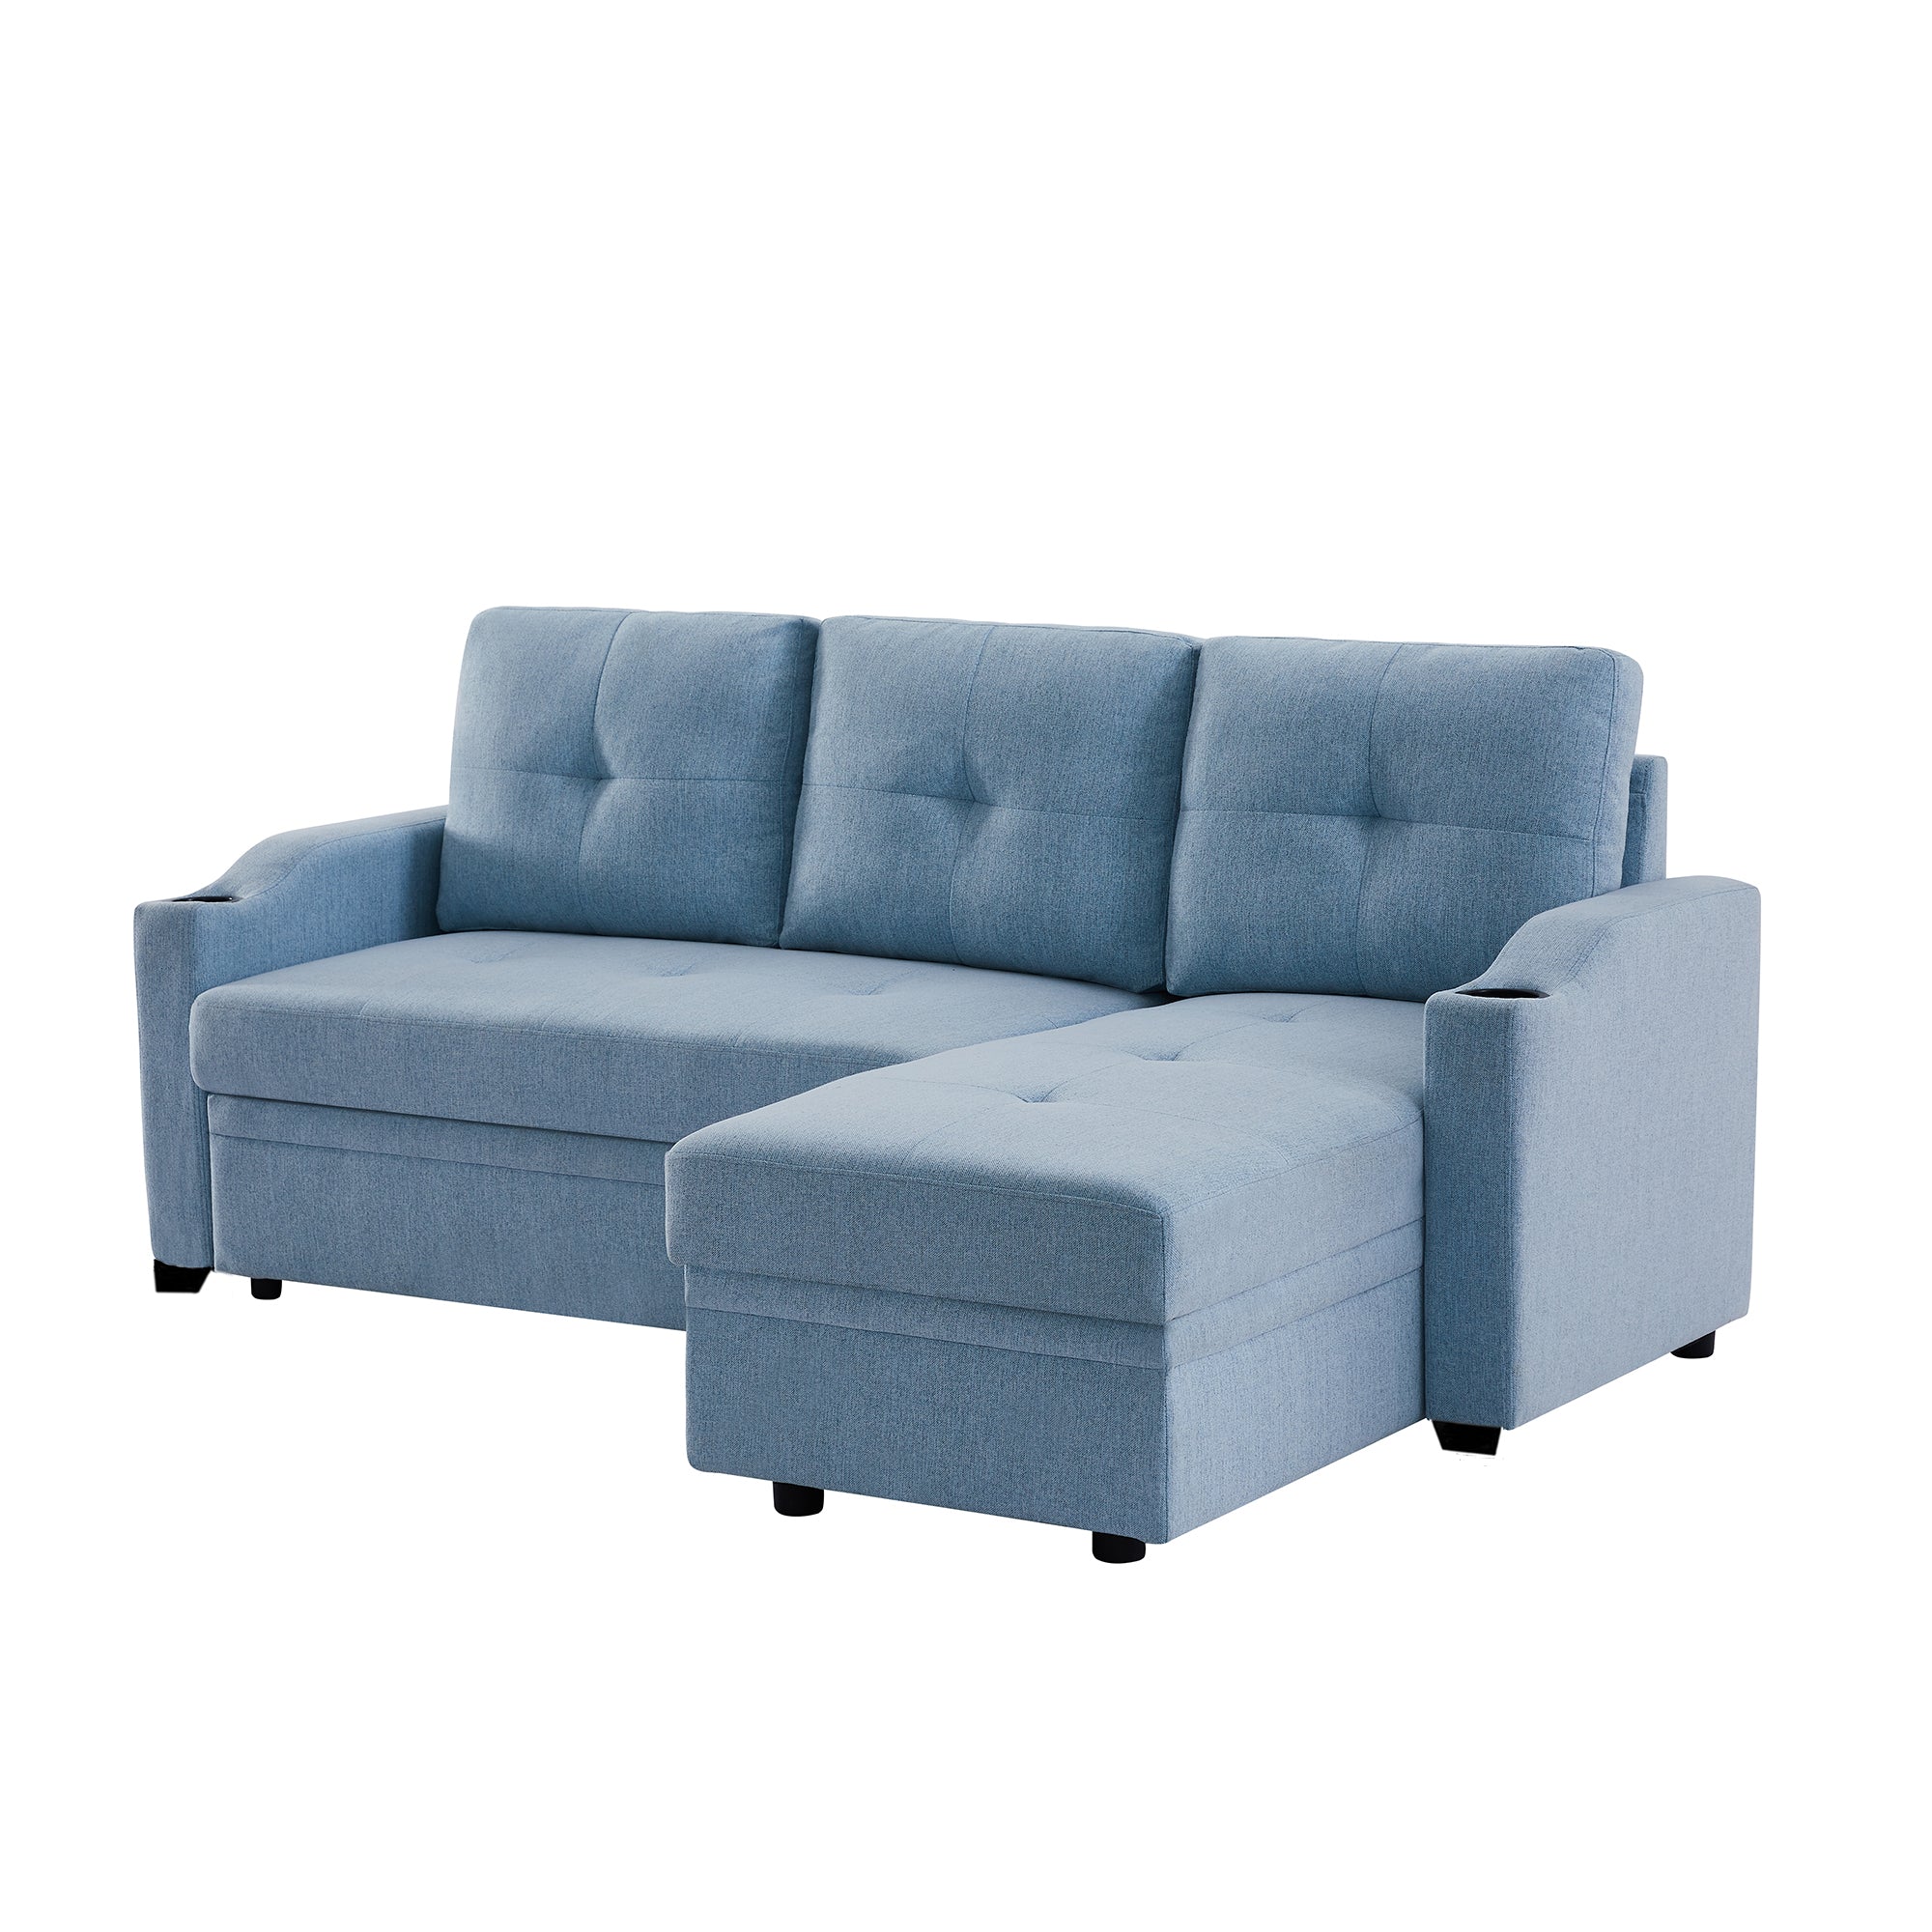 81" Reversible Sectional Couch with Storage Chaise and Two Cup Holders-Boyel Living